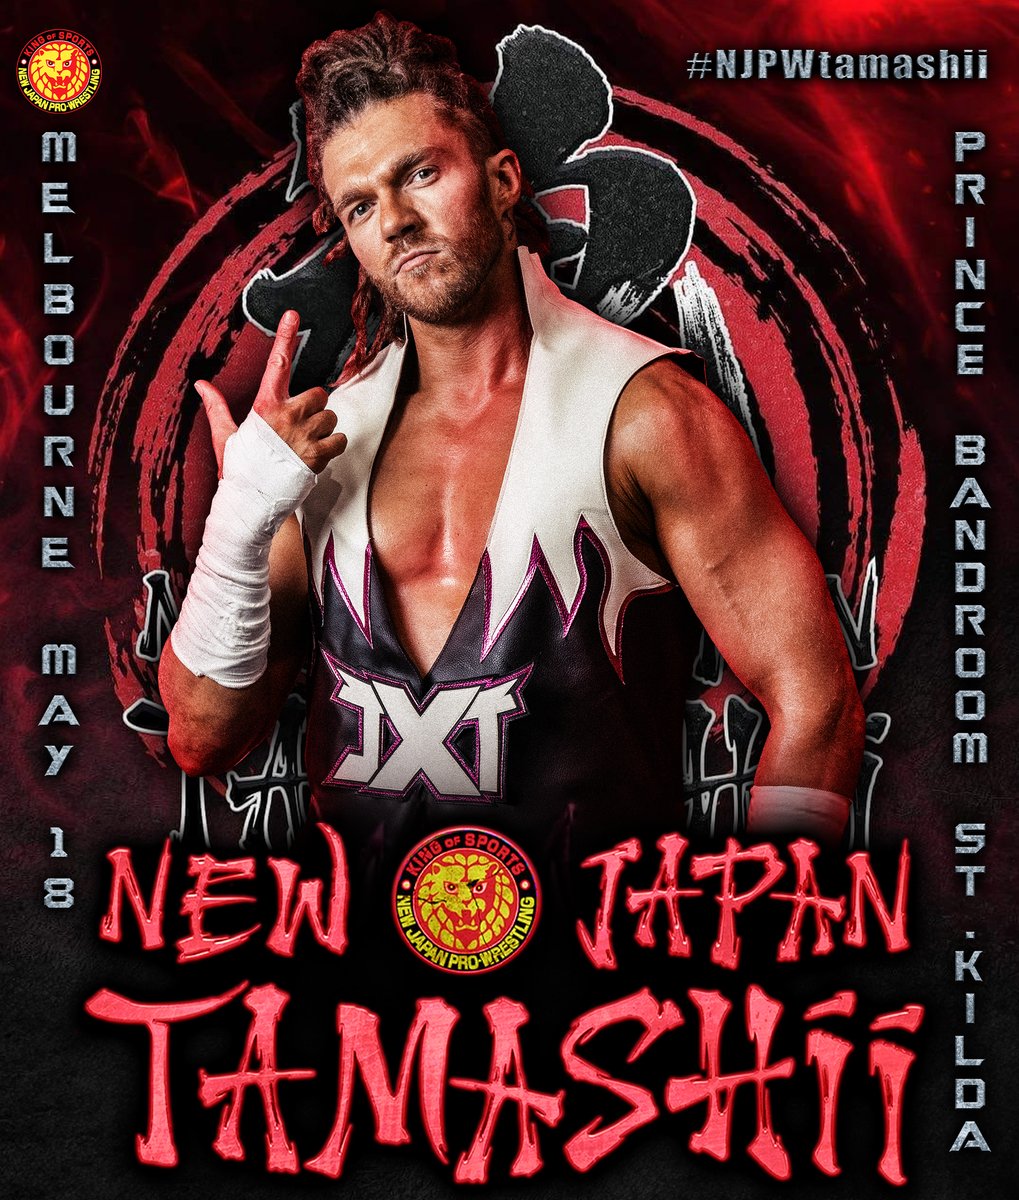 This Saturday, JXT enters the realm of @njpwglobal at Melbourne's @njtamashii event!

In a huge match against the imposing @Jaketaylorpw from @FaleDojo

It's certainty a night you don't want to miss!

Sat May 18
Prince Bandroom, St.Kilda
🎟: tinyurl.com/MelbNJPW

#NJPWTamashii